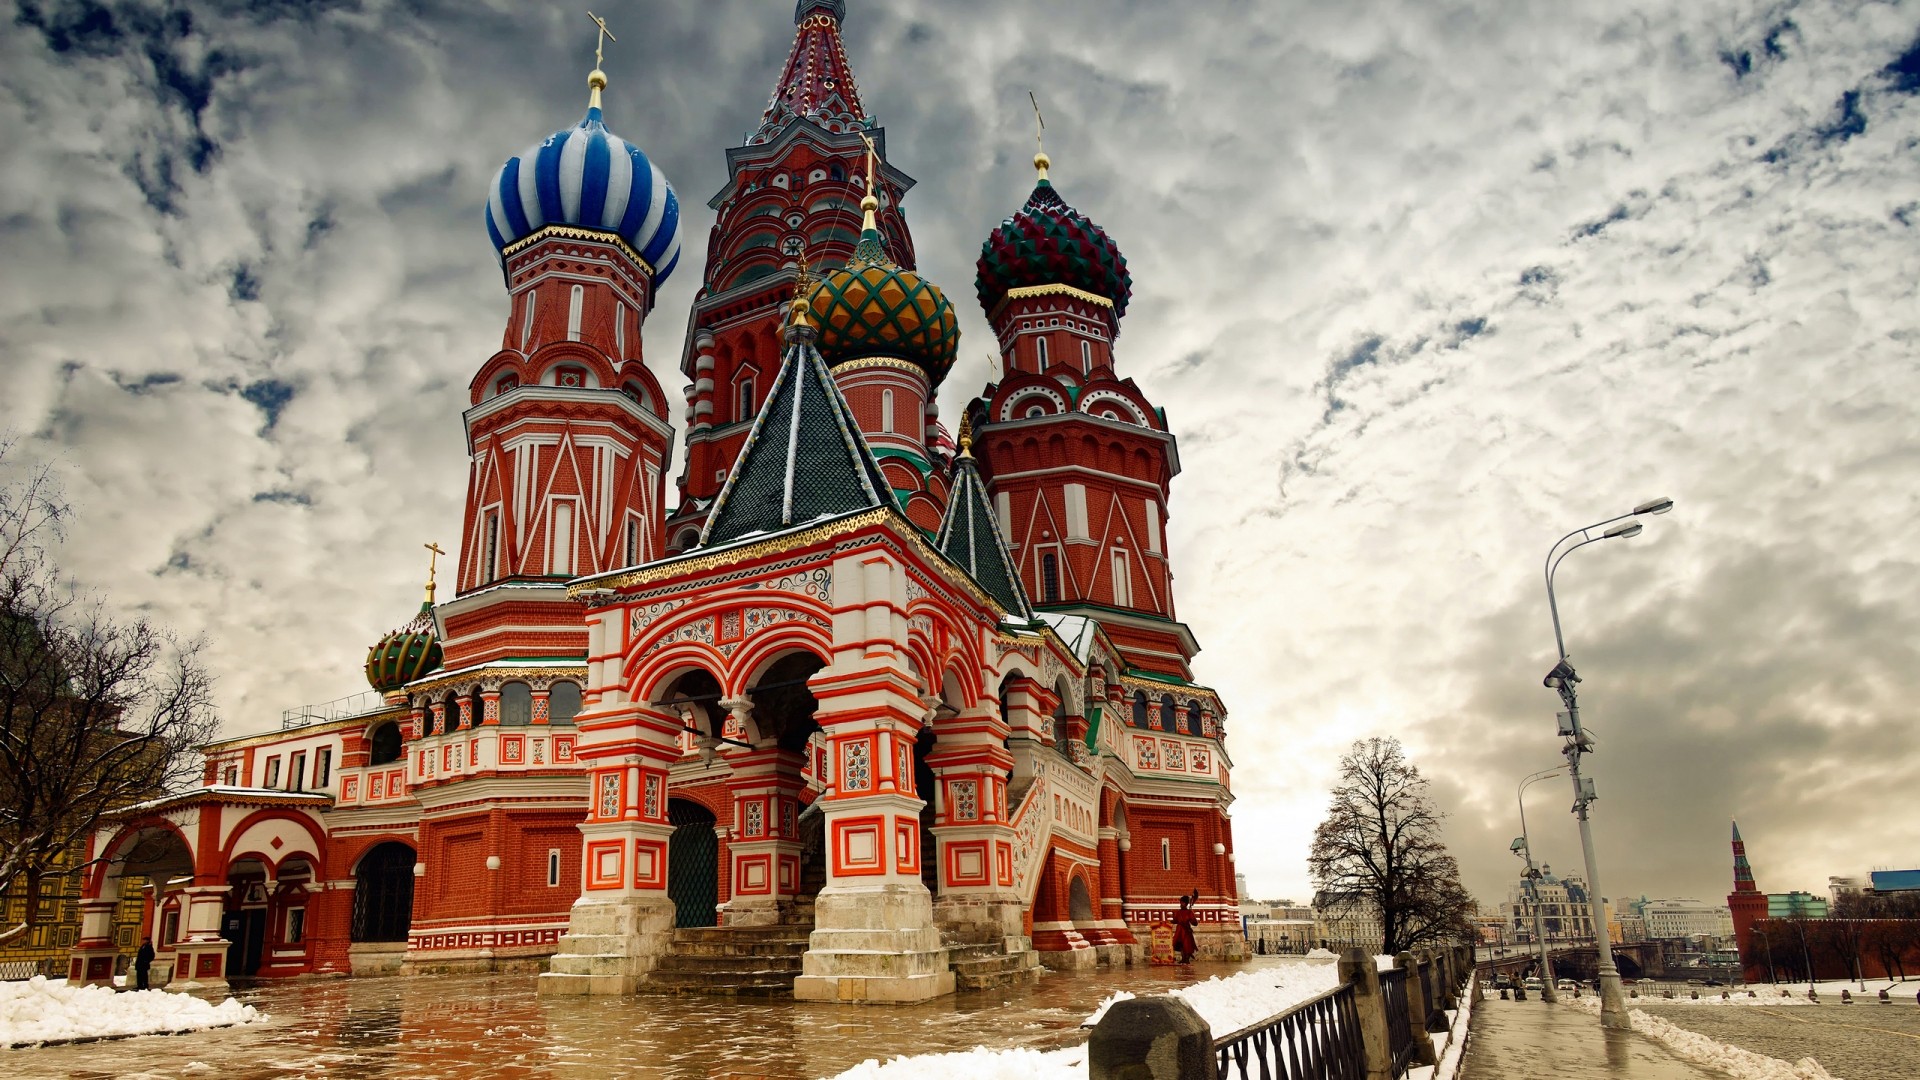 General 1920x1080 Russia architecture Moscow landmark Europe Saint Basil's Cathedral